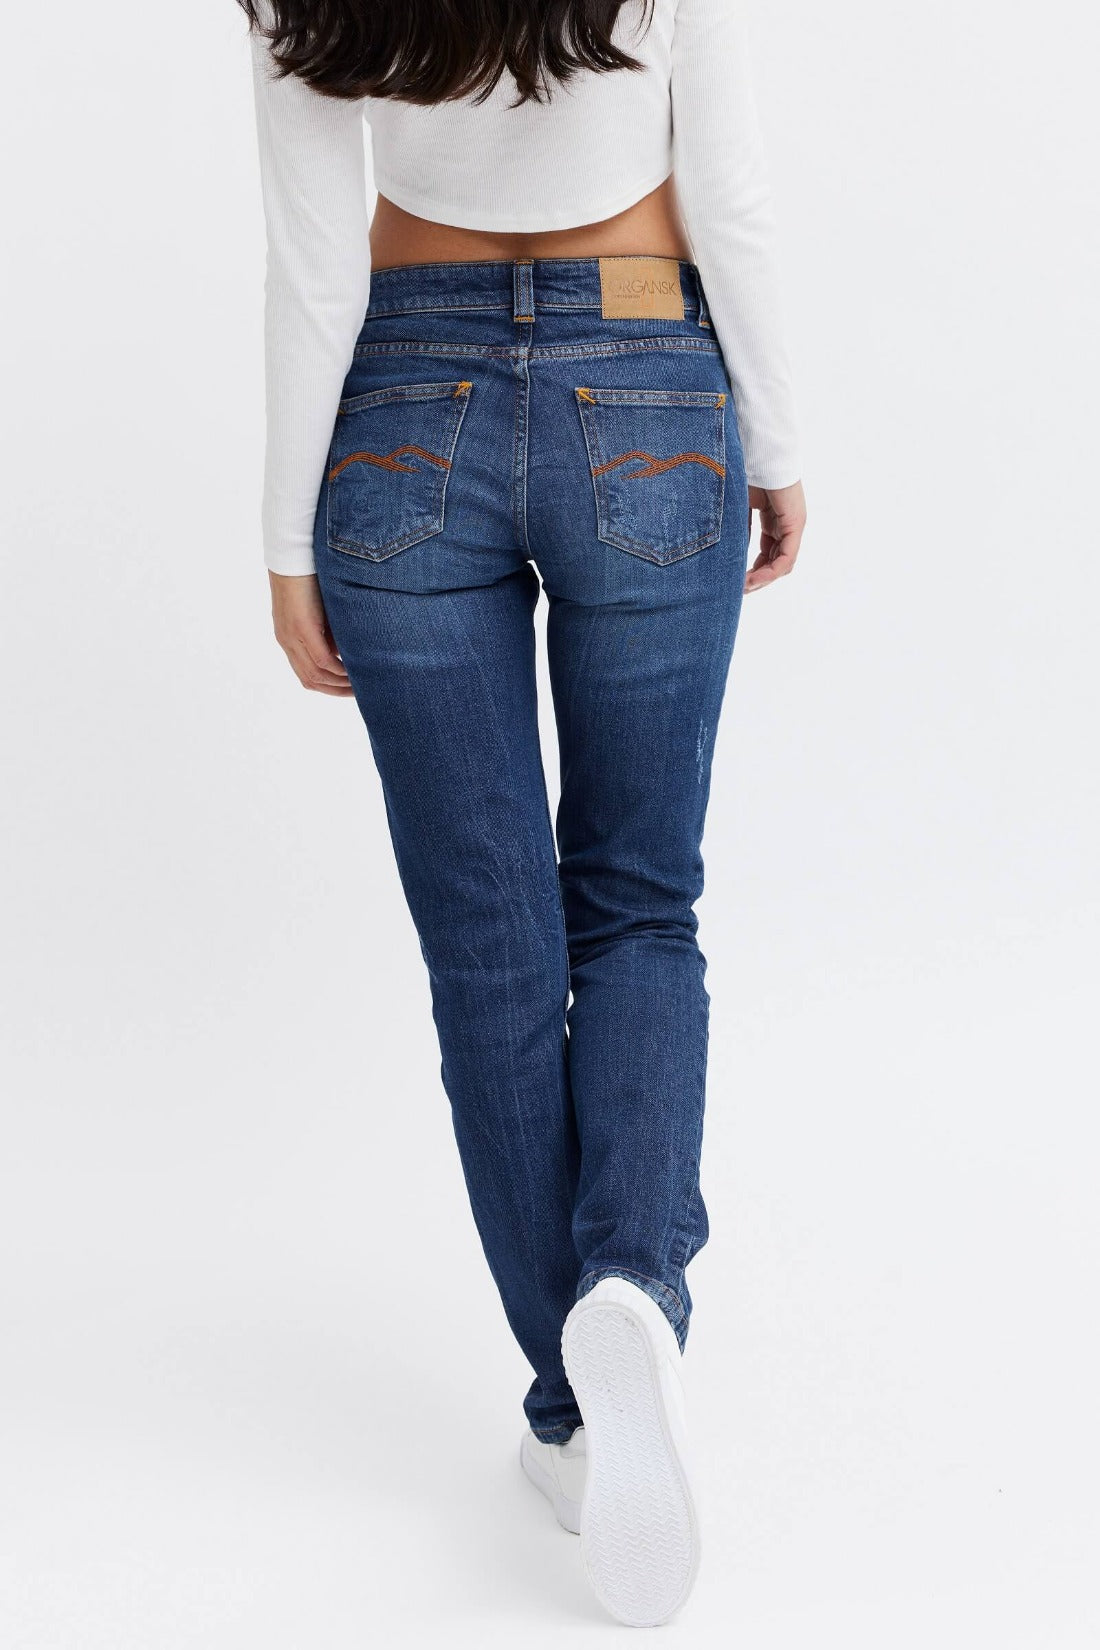 Lease Ethical Jeans  with stylish pockets and vegan patch